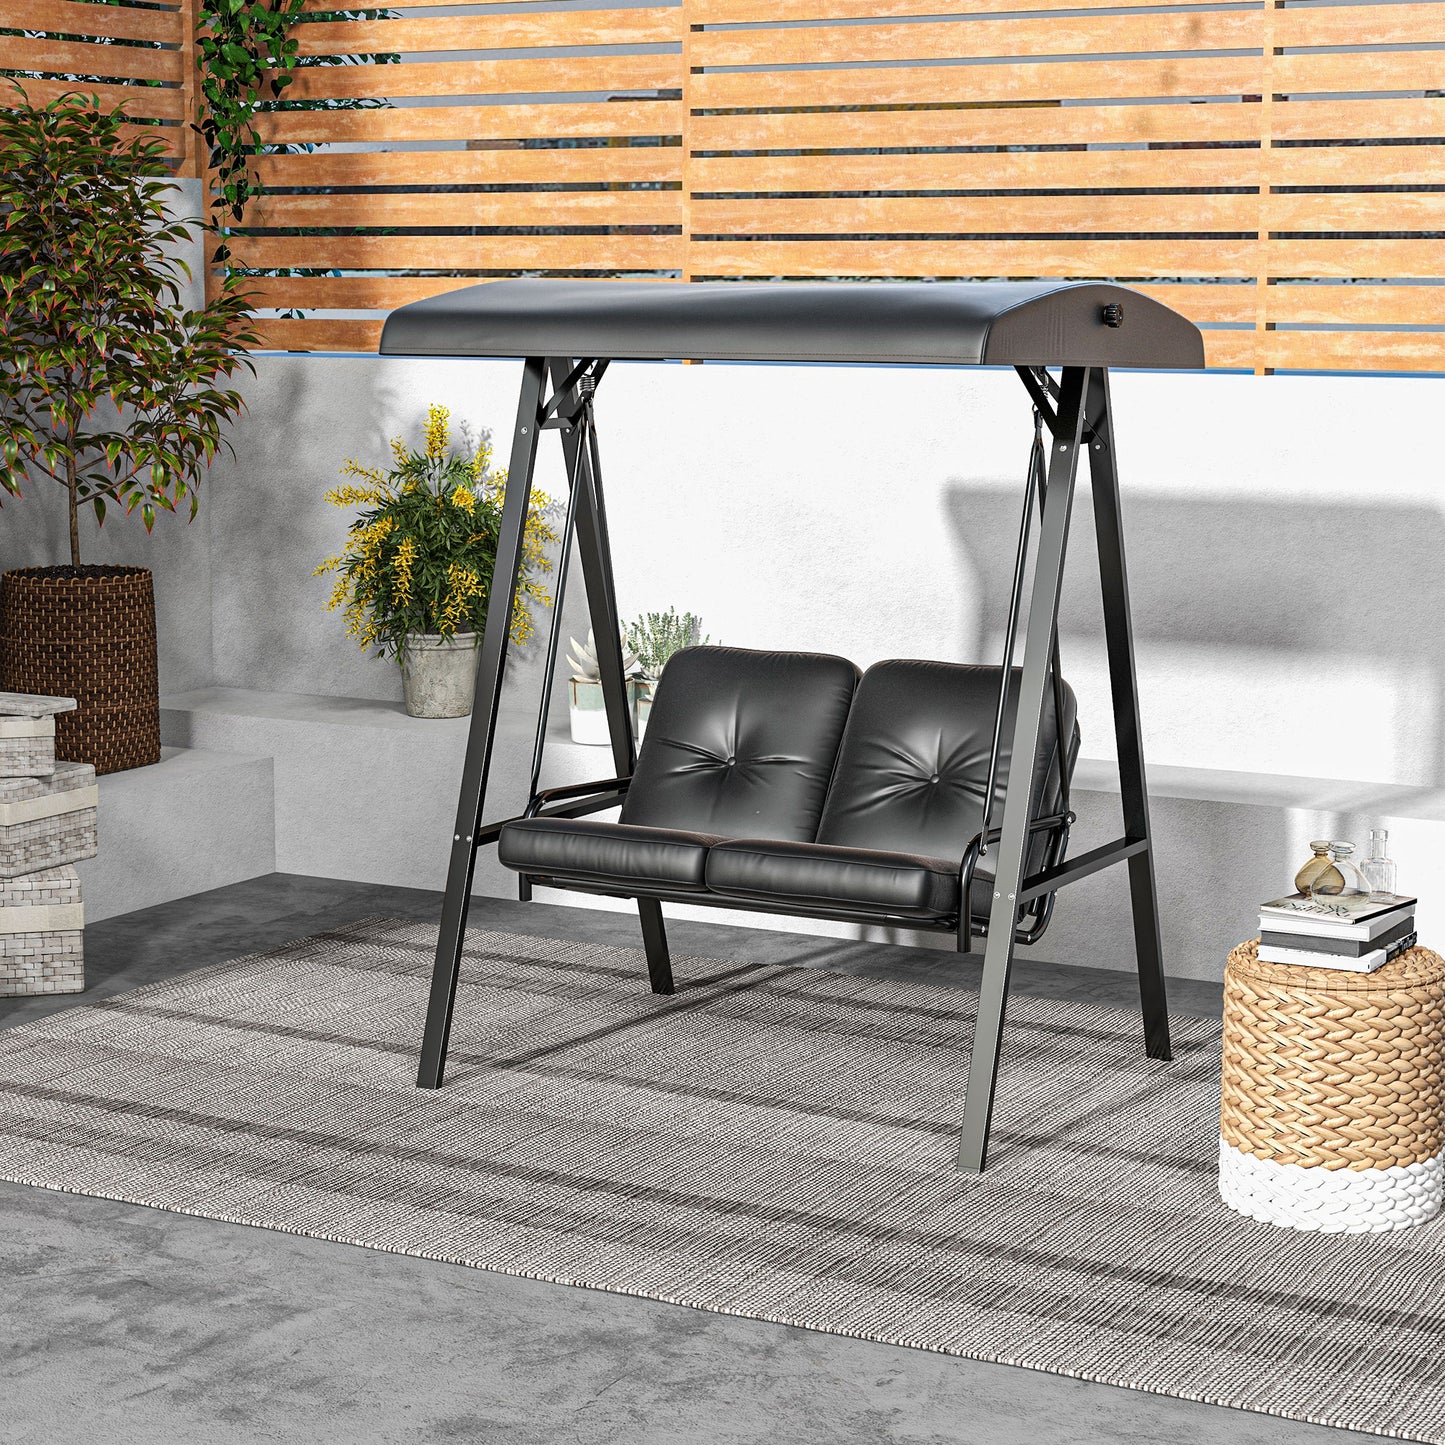 Outsunny Two-Seater Garden Swing Bench, with Adjustable Canopy - Black